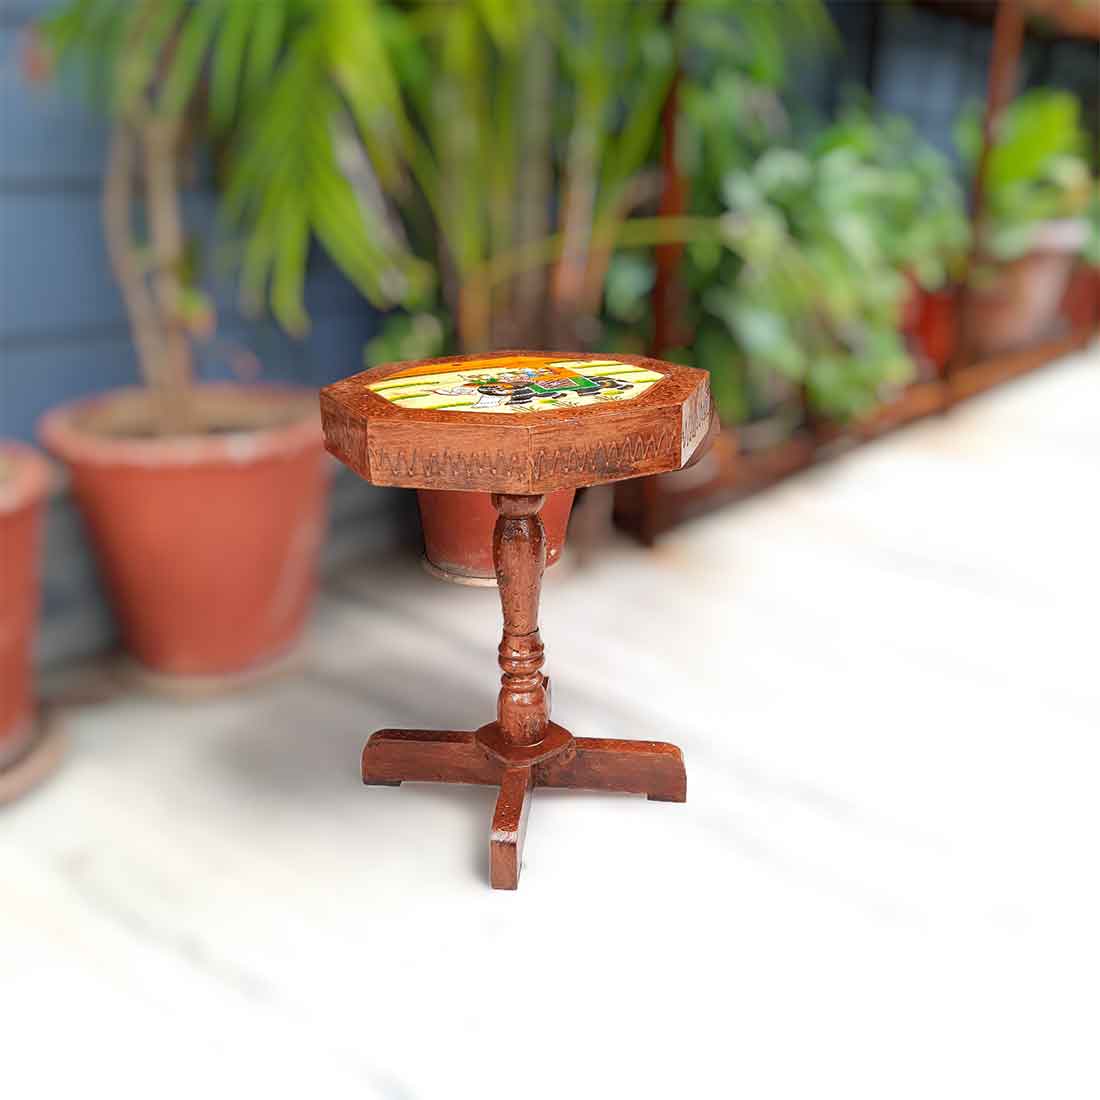 Wooden Side Table | End Table | Wood Stool - for Home Decor, Corners, Sofa Side & Gifts - 15 Inch - apkamart